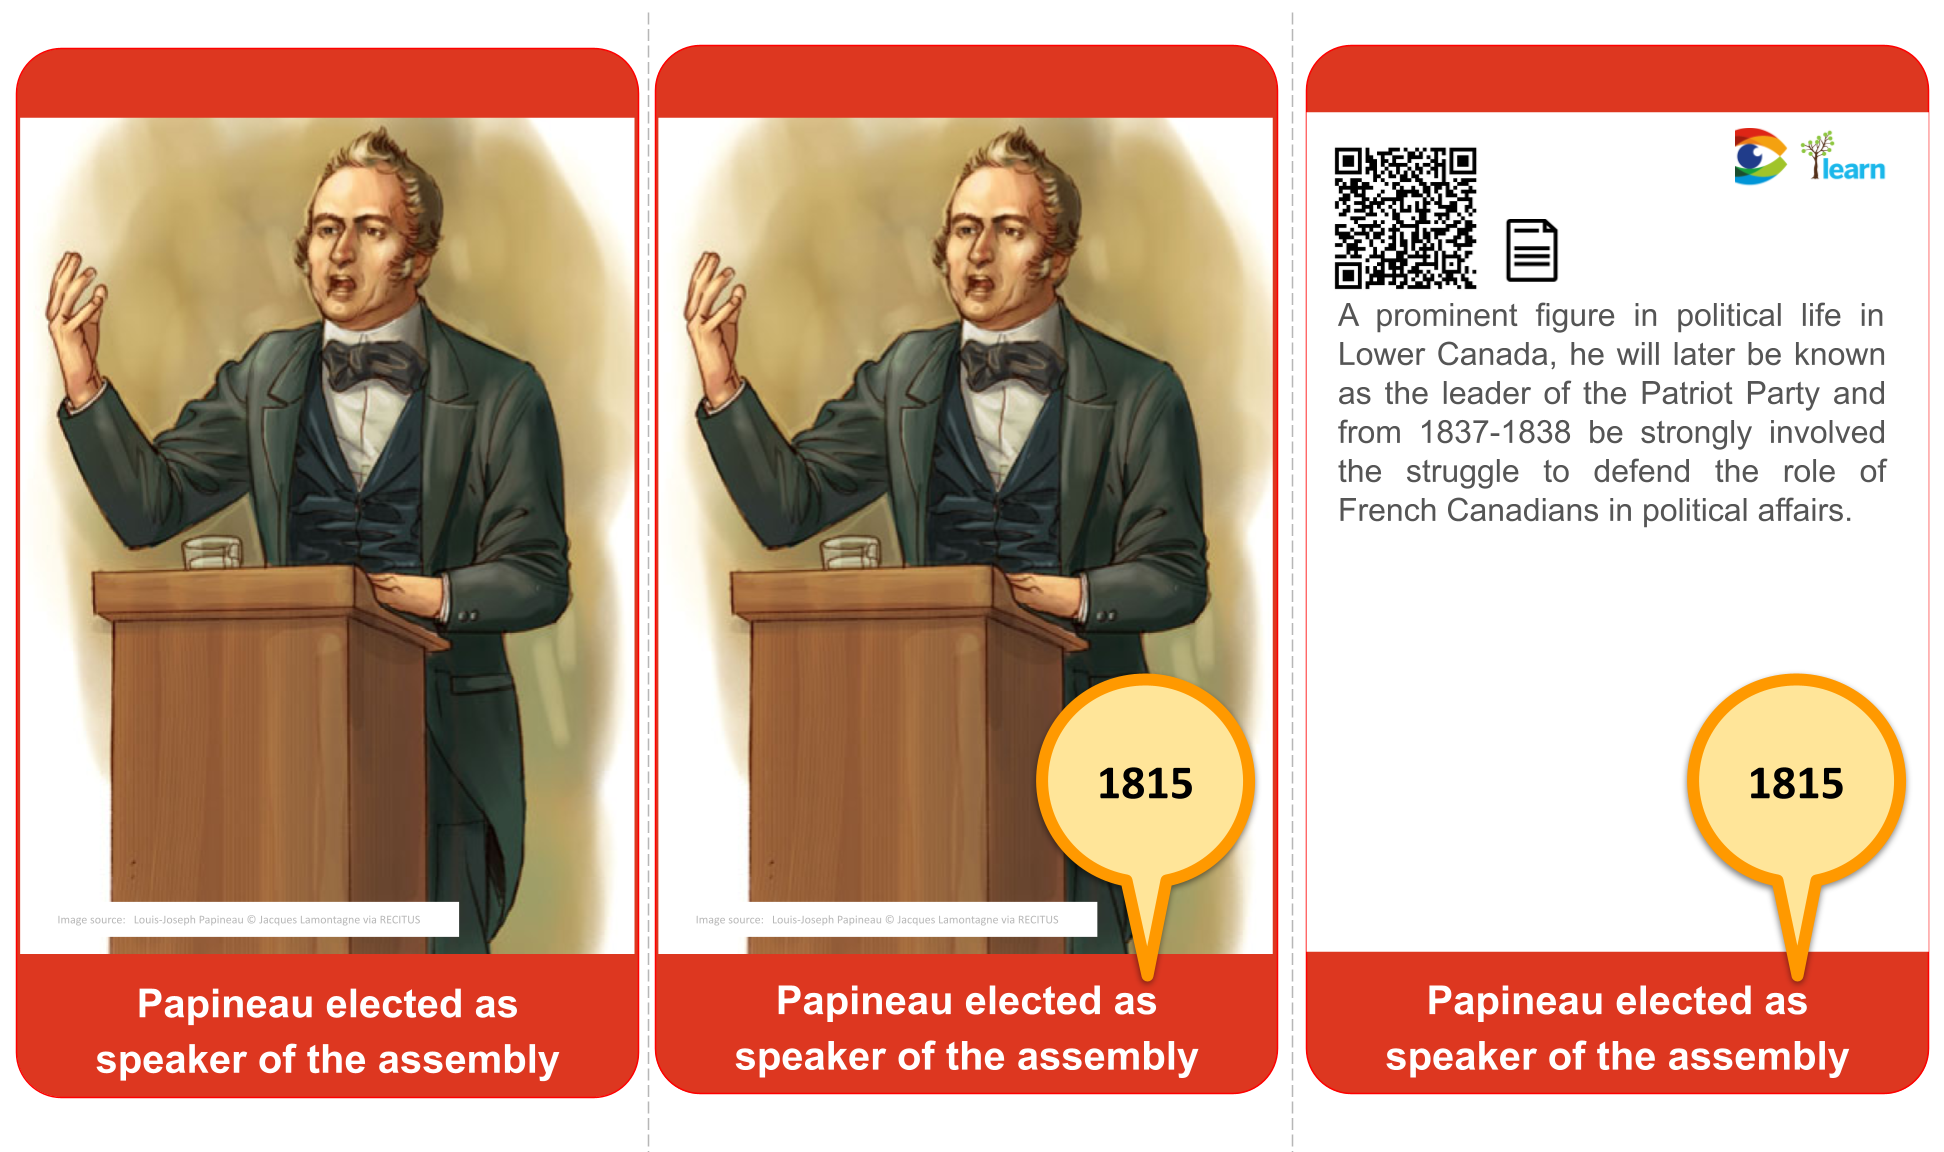 1815 Papineau elected speaker of assembly